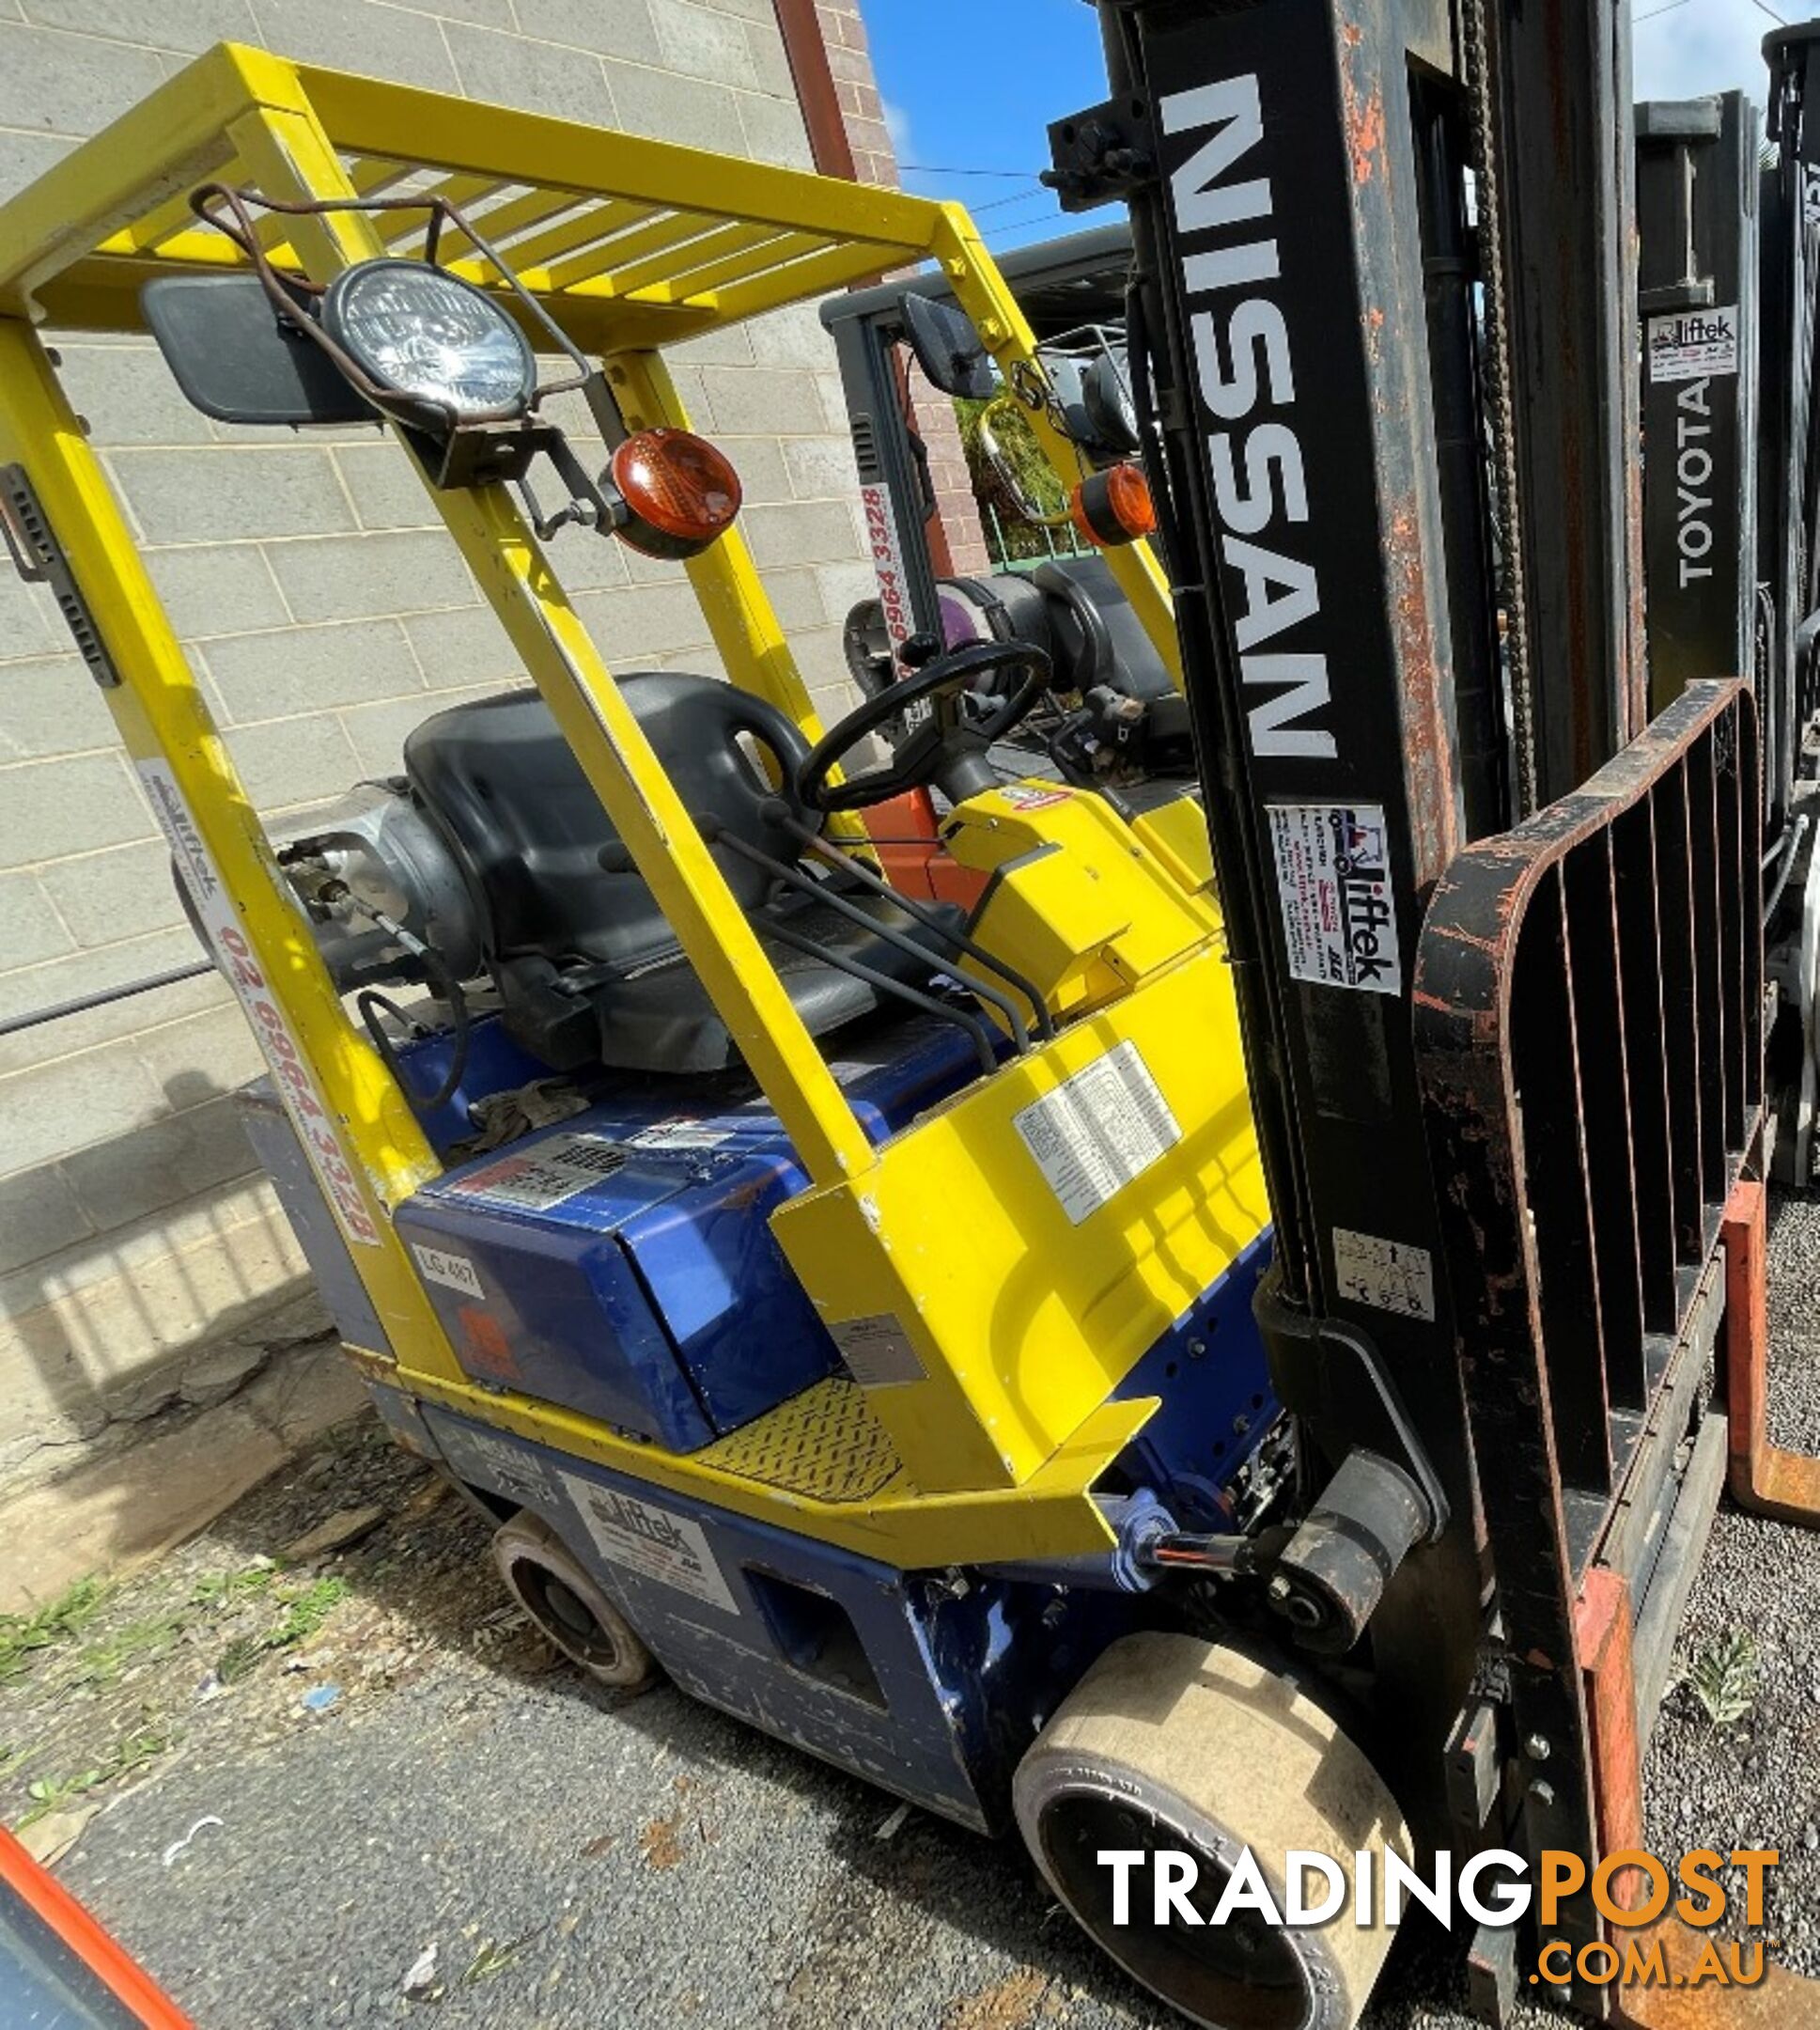 Used Nissan 1.5TON Forklift For Sale